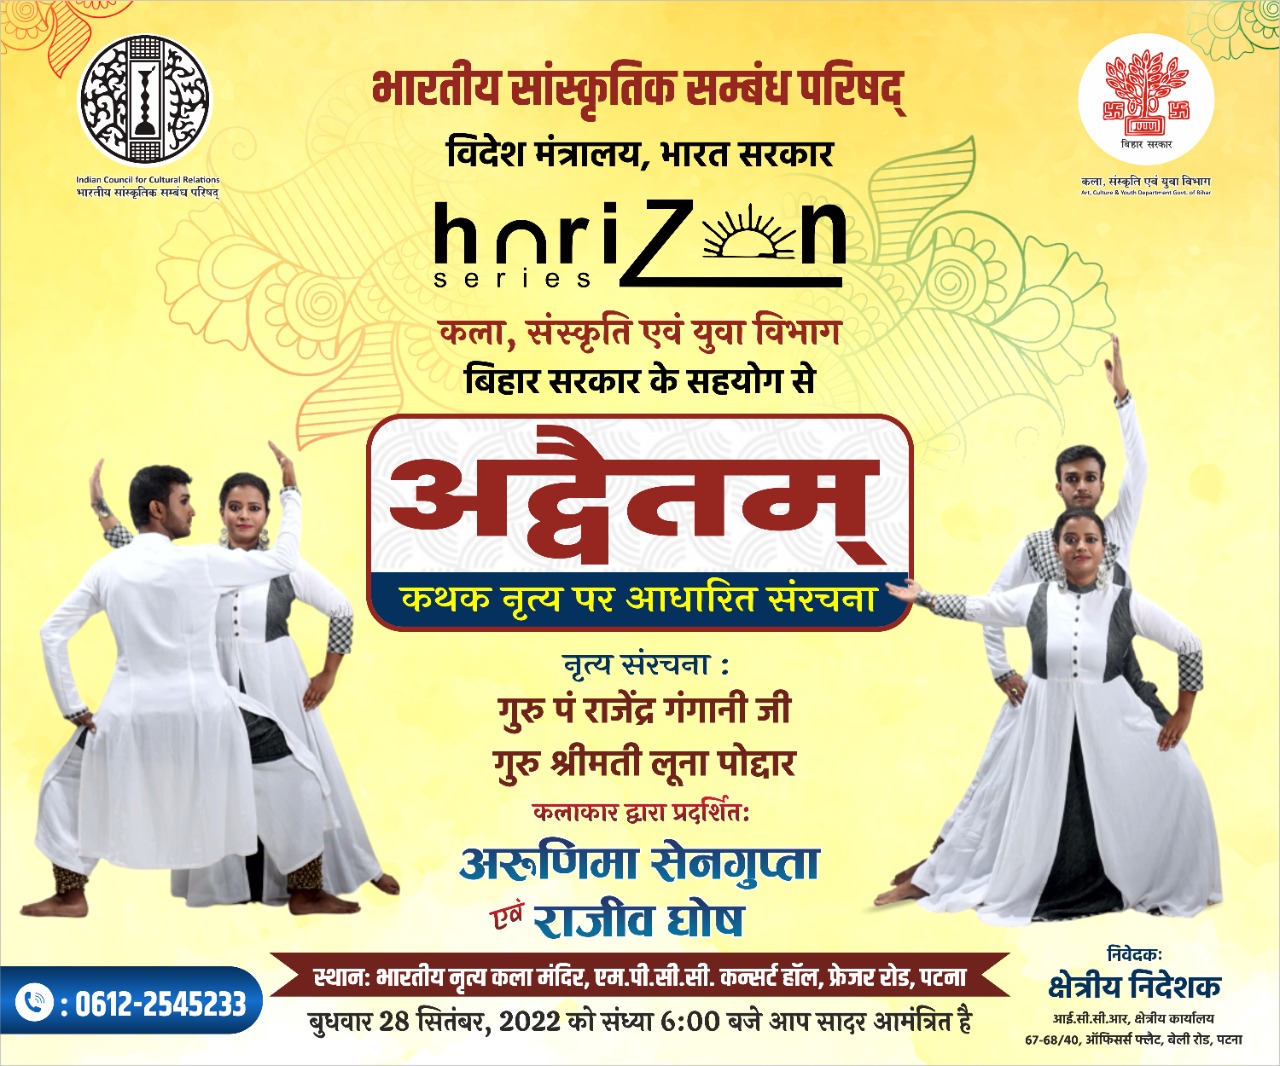 Indian Council for Cultural Relations, Regional Office, Patna and in collaboration with Art, Culture and Youth Department, Government of Bihar under Horizon Series program on 28.09.2022 (Wednesday) from 06:00 pm by "Arunima Sengupta" (Advaitam) on kathak dance